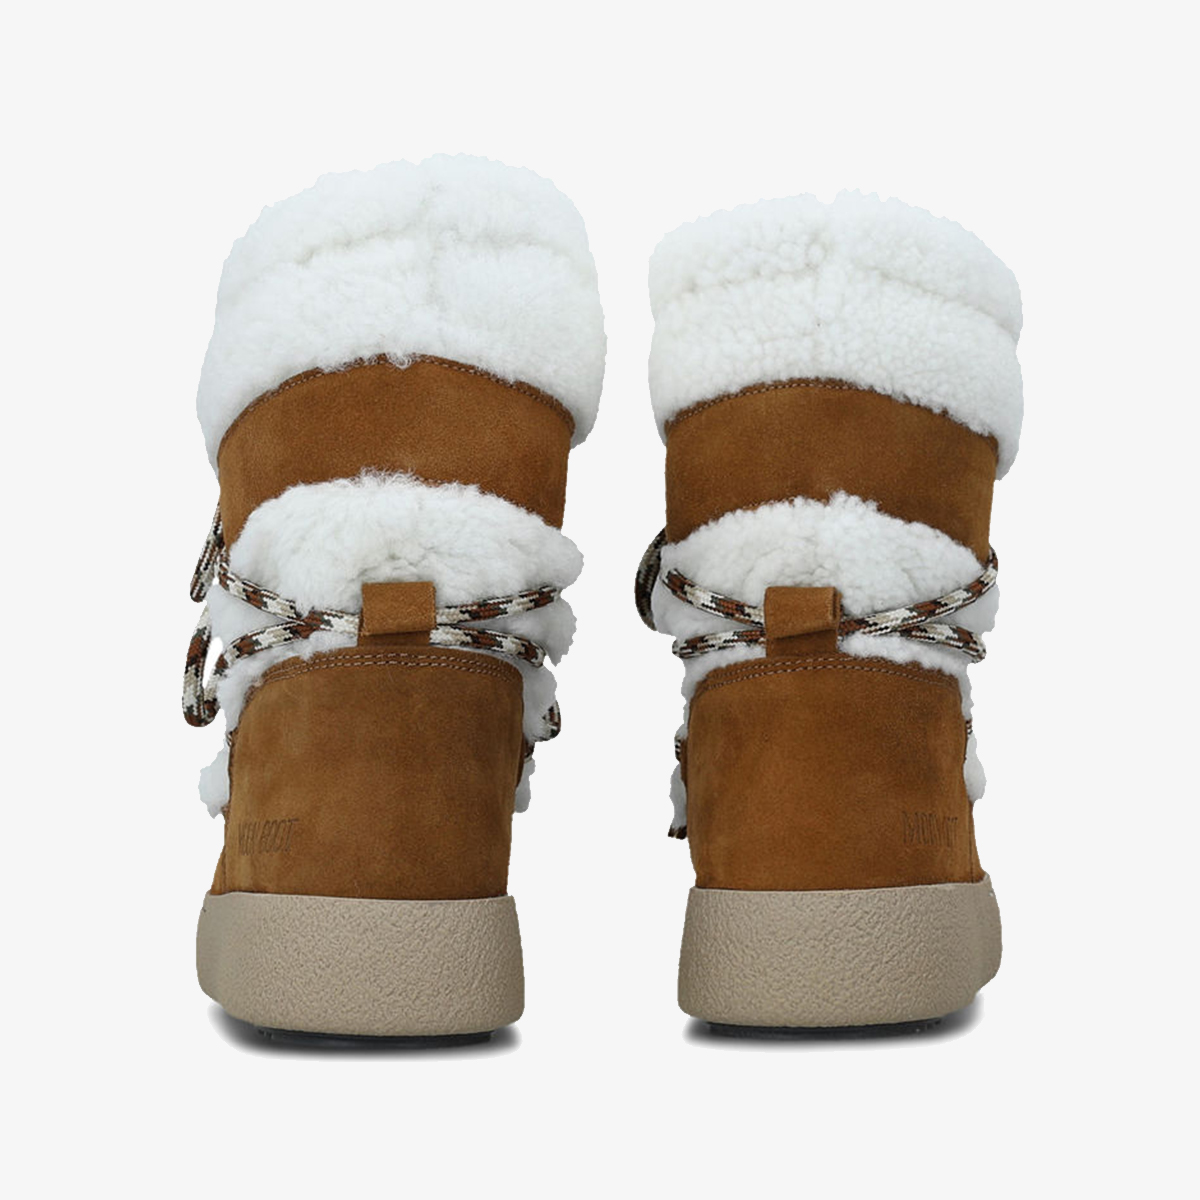 MOON BOOT Čizme MB LTRACK SHEARLING WHISKY/OFF WHITE 